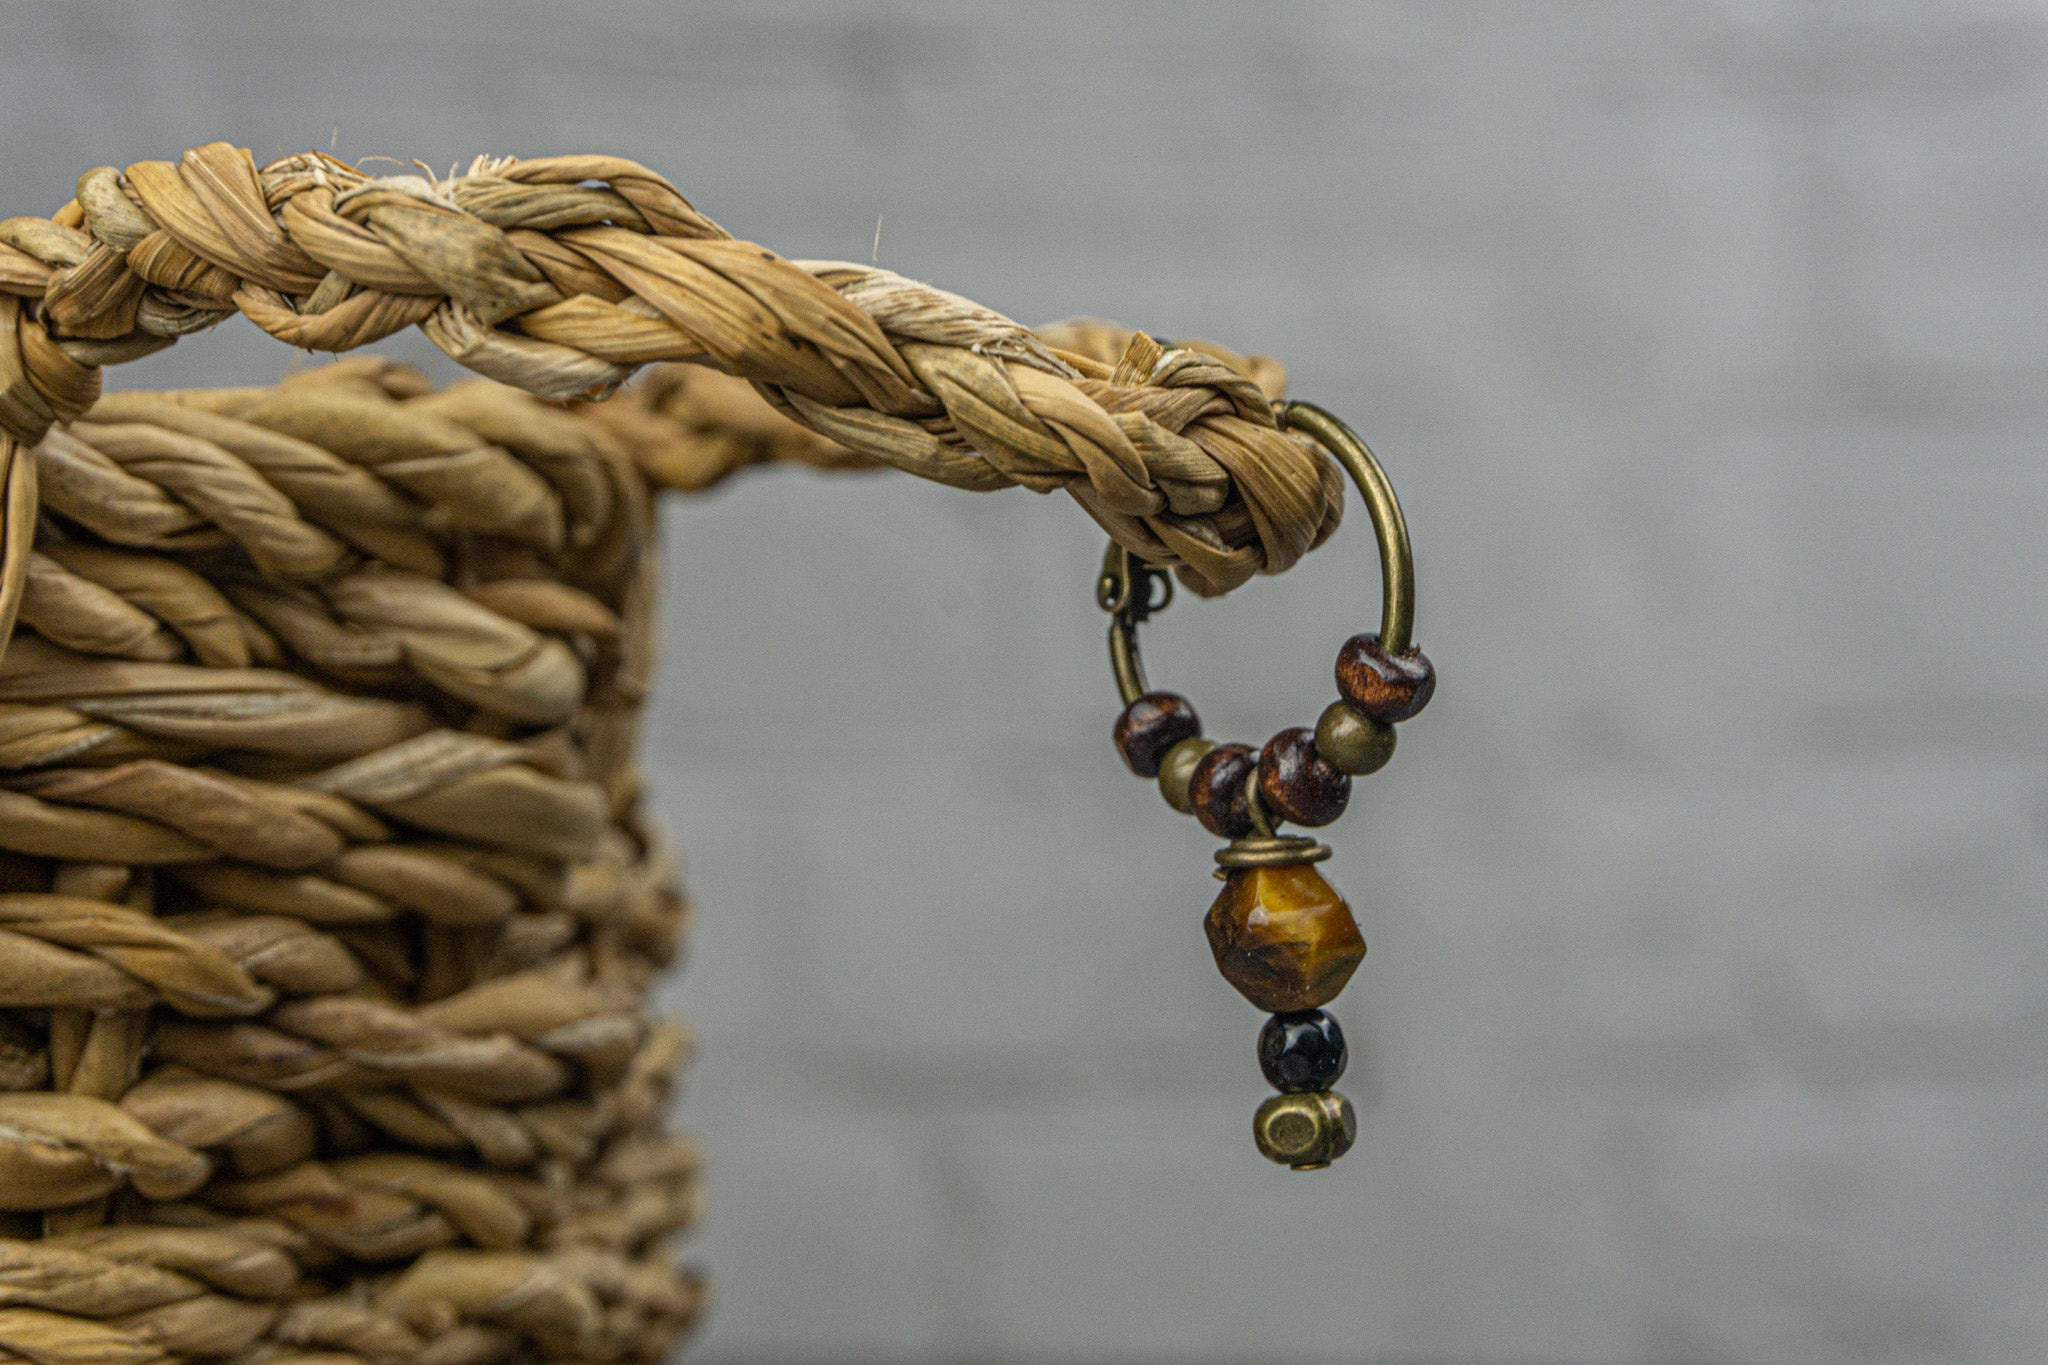 Hoop earring with wood, bronze beads and a dangling tiger eye stone